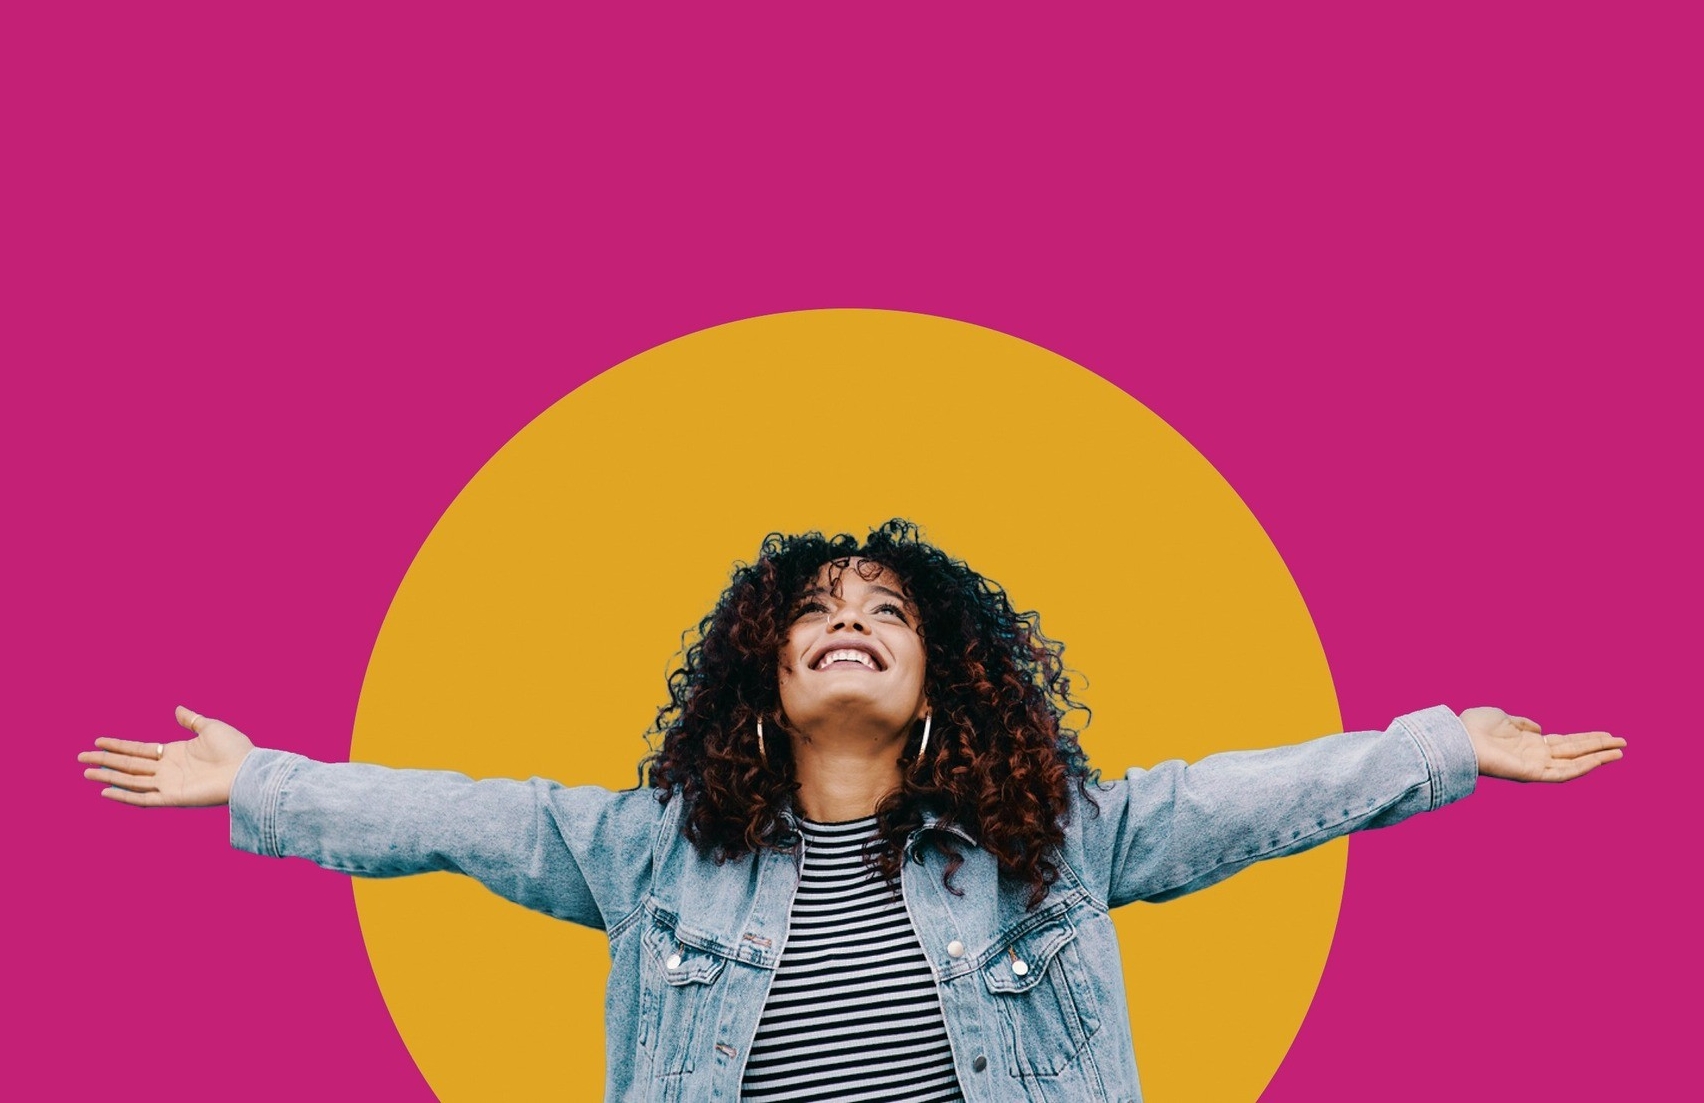 An exuberant woman with curly hair is smiling broadly with her eyes closed, arms wide open as if embracing the world. She's wearing a striped top underneath a denim jacket. The background is vibrant fuchsia with a large, mustard yellow circle positioned behind her, giving a lively and joyful composition to the image.